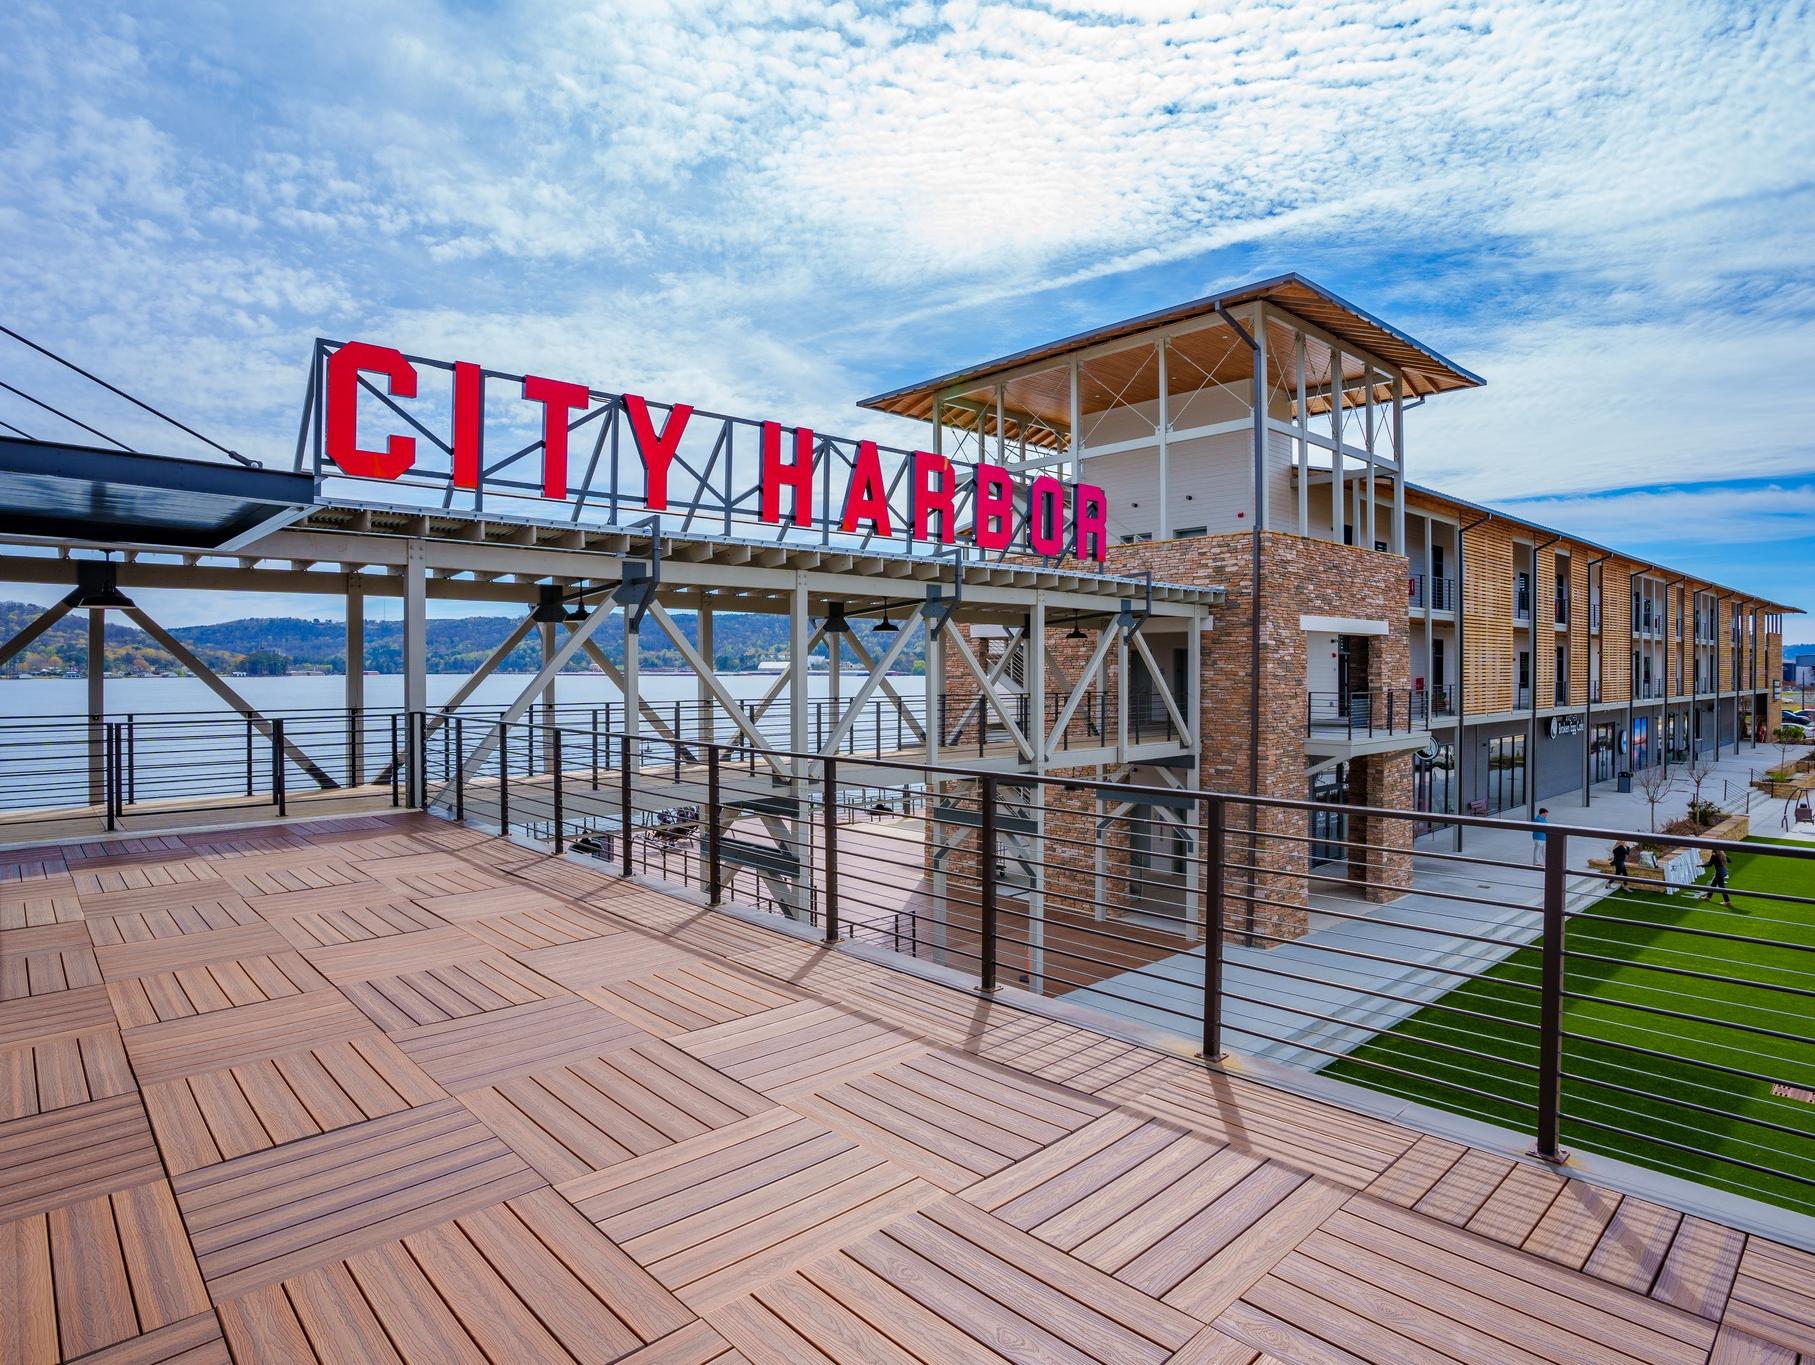 City Harbor on the lake is just minutes from Howard Bentley Buick GMC